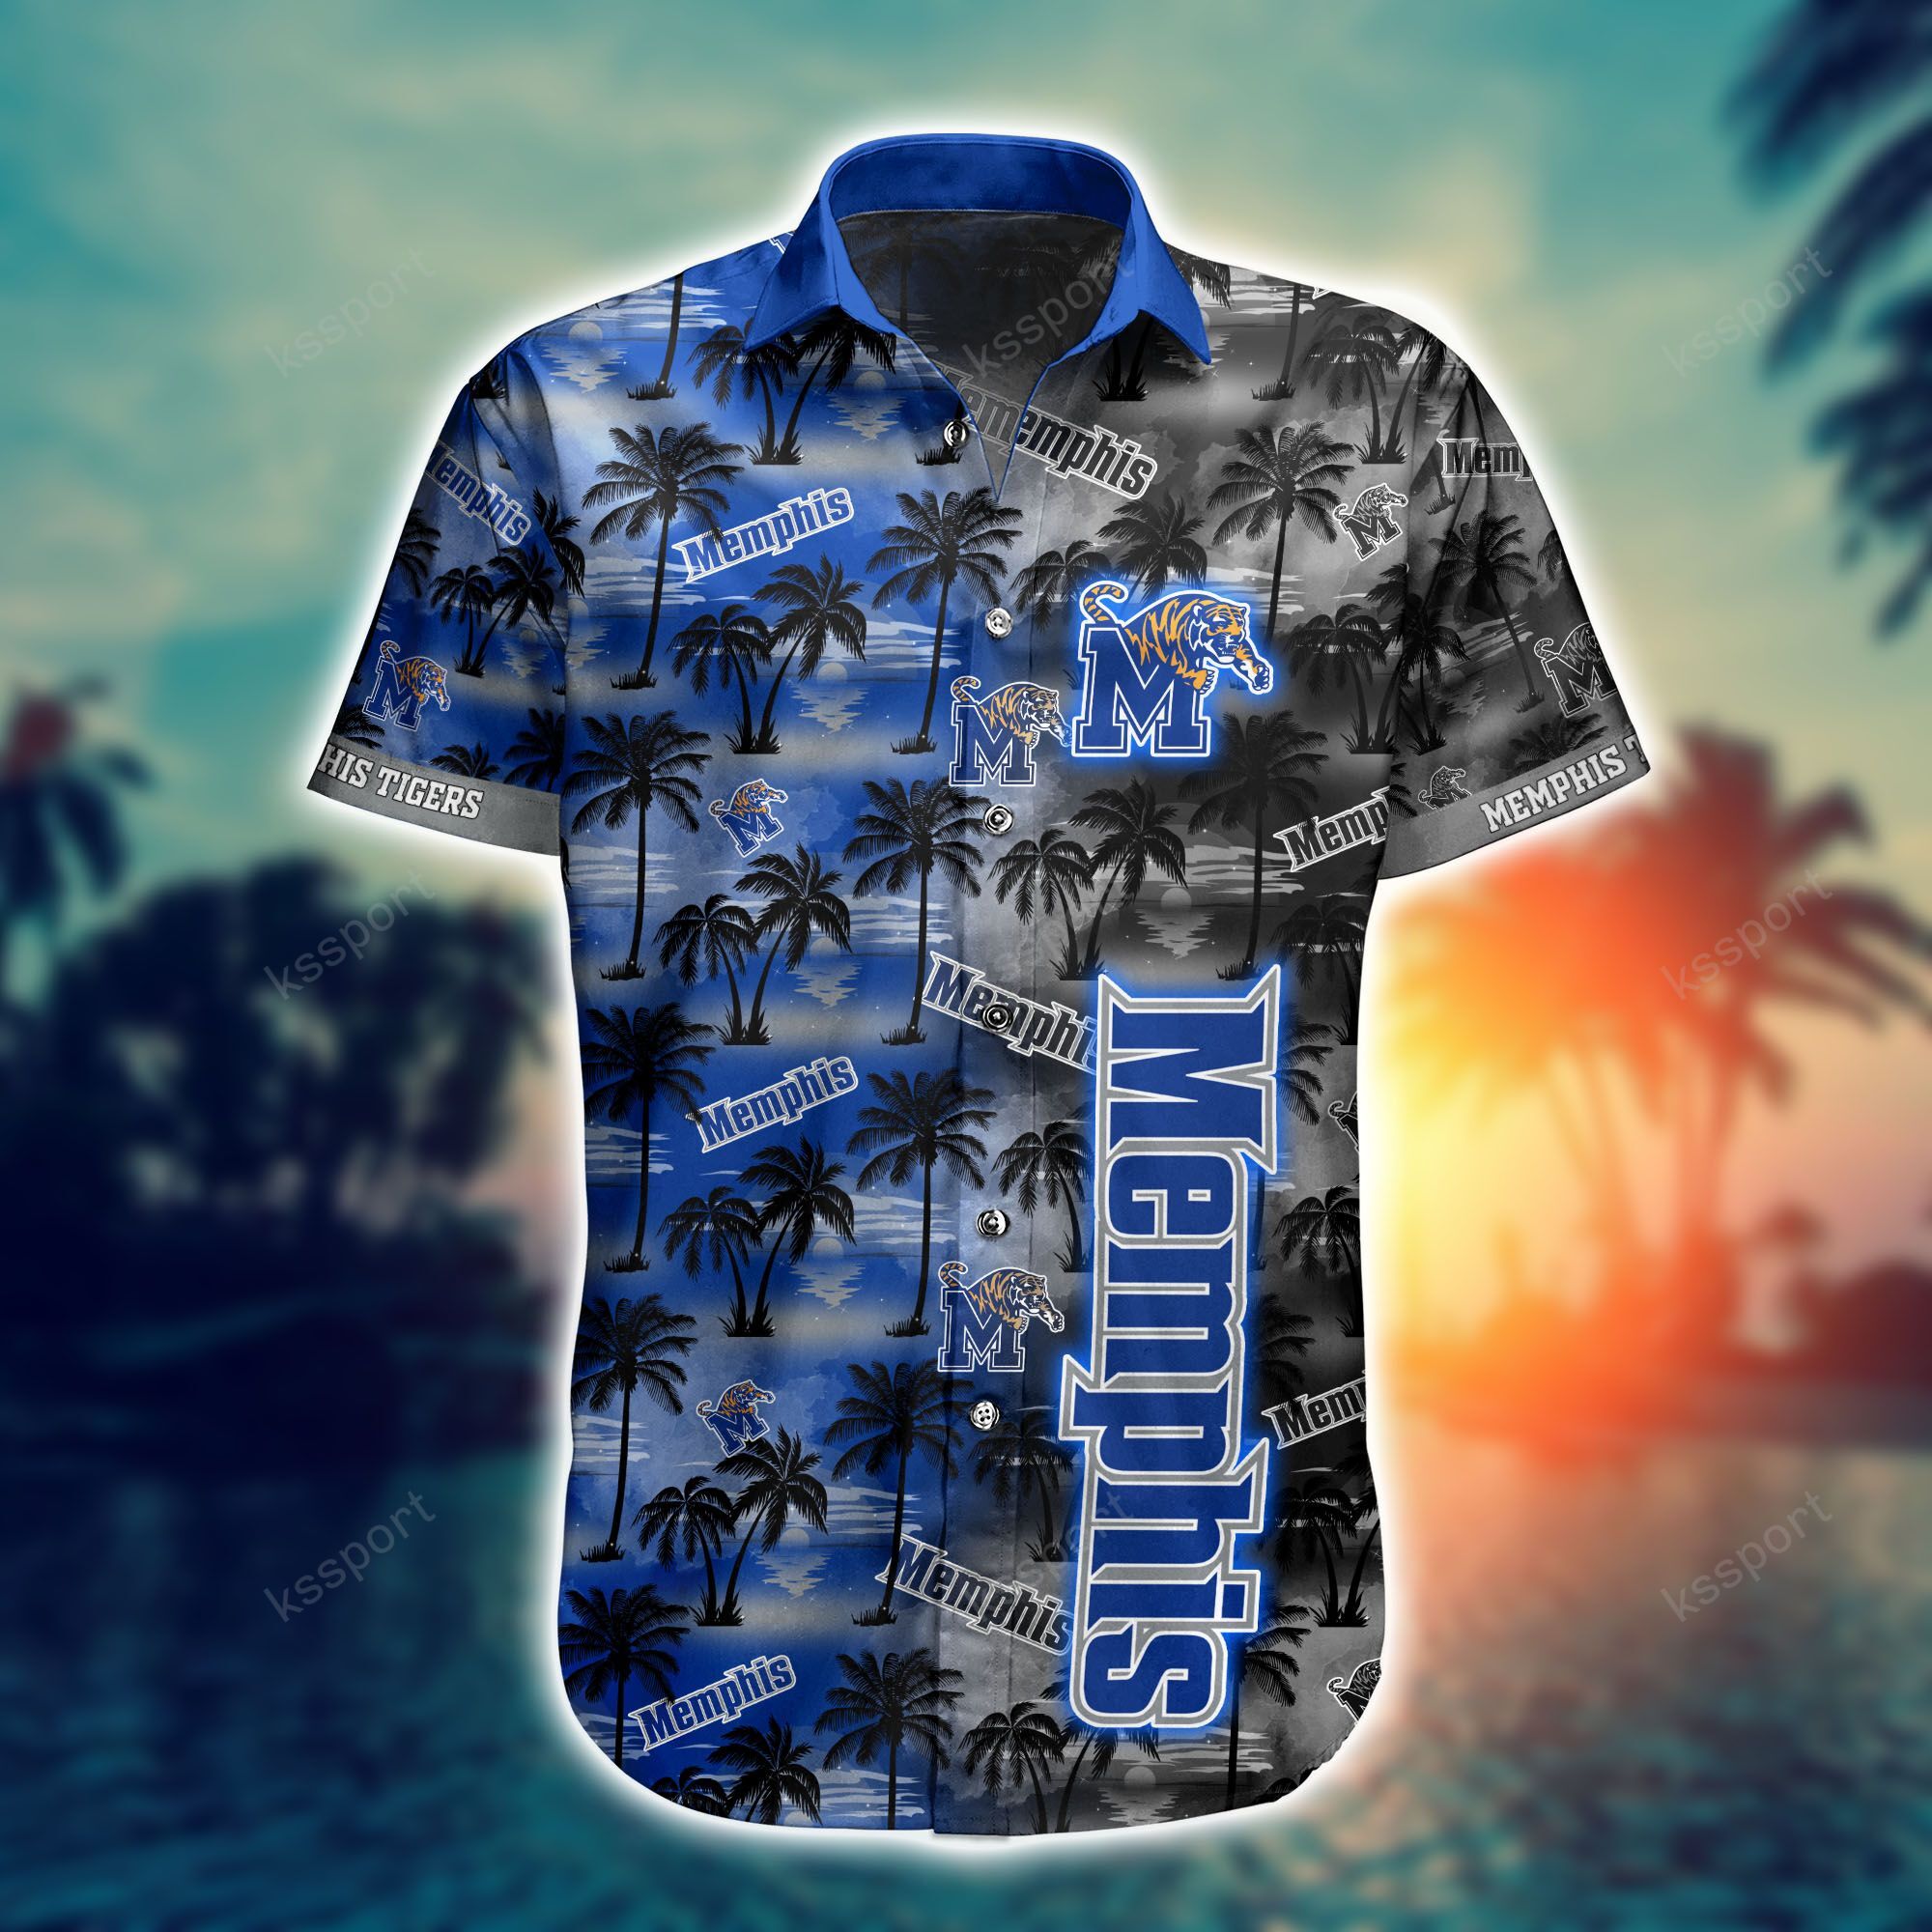 Top cool Hawaiian shirt 2022 - Make sure you get yours today before they run out! 147